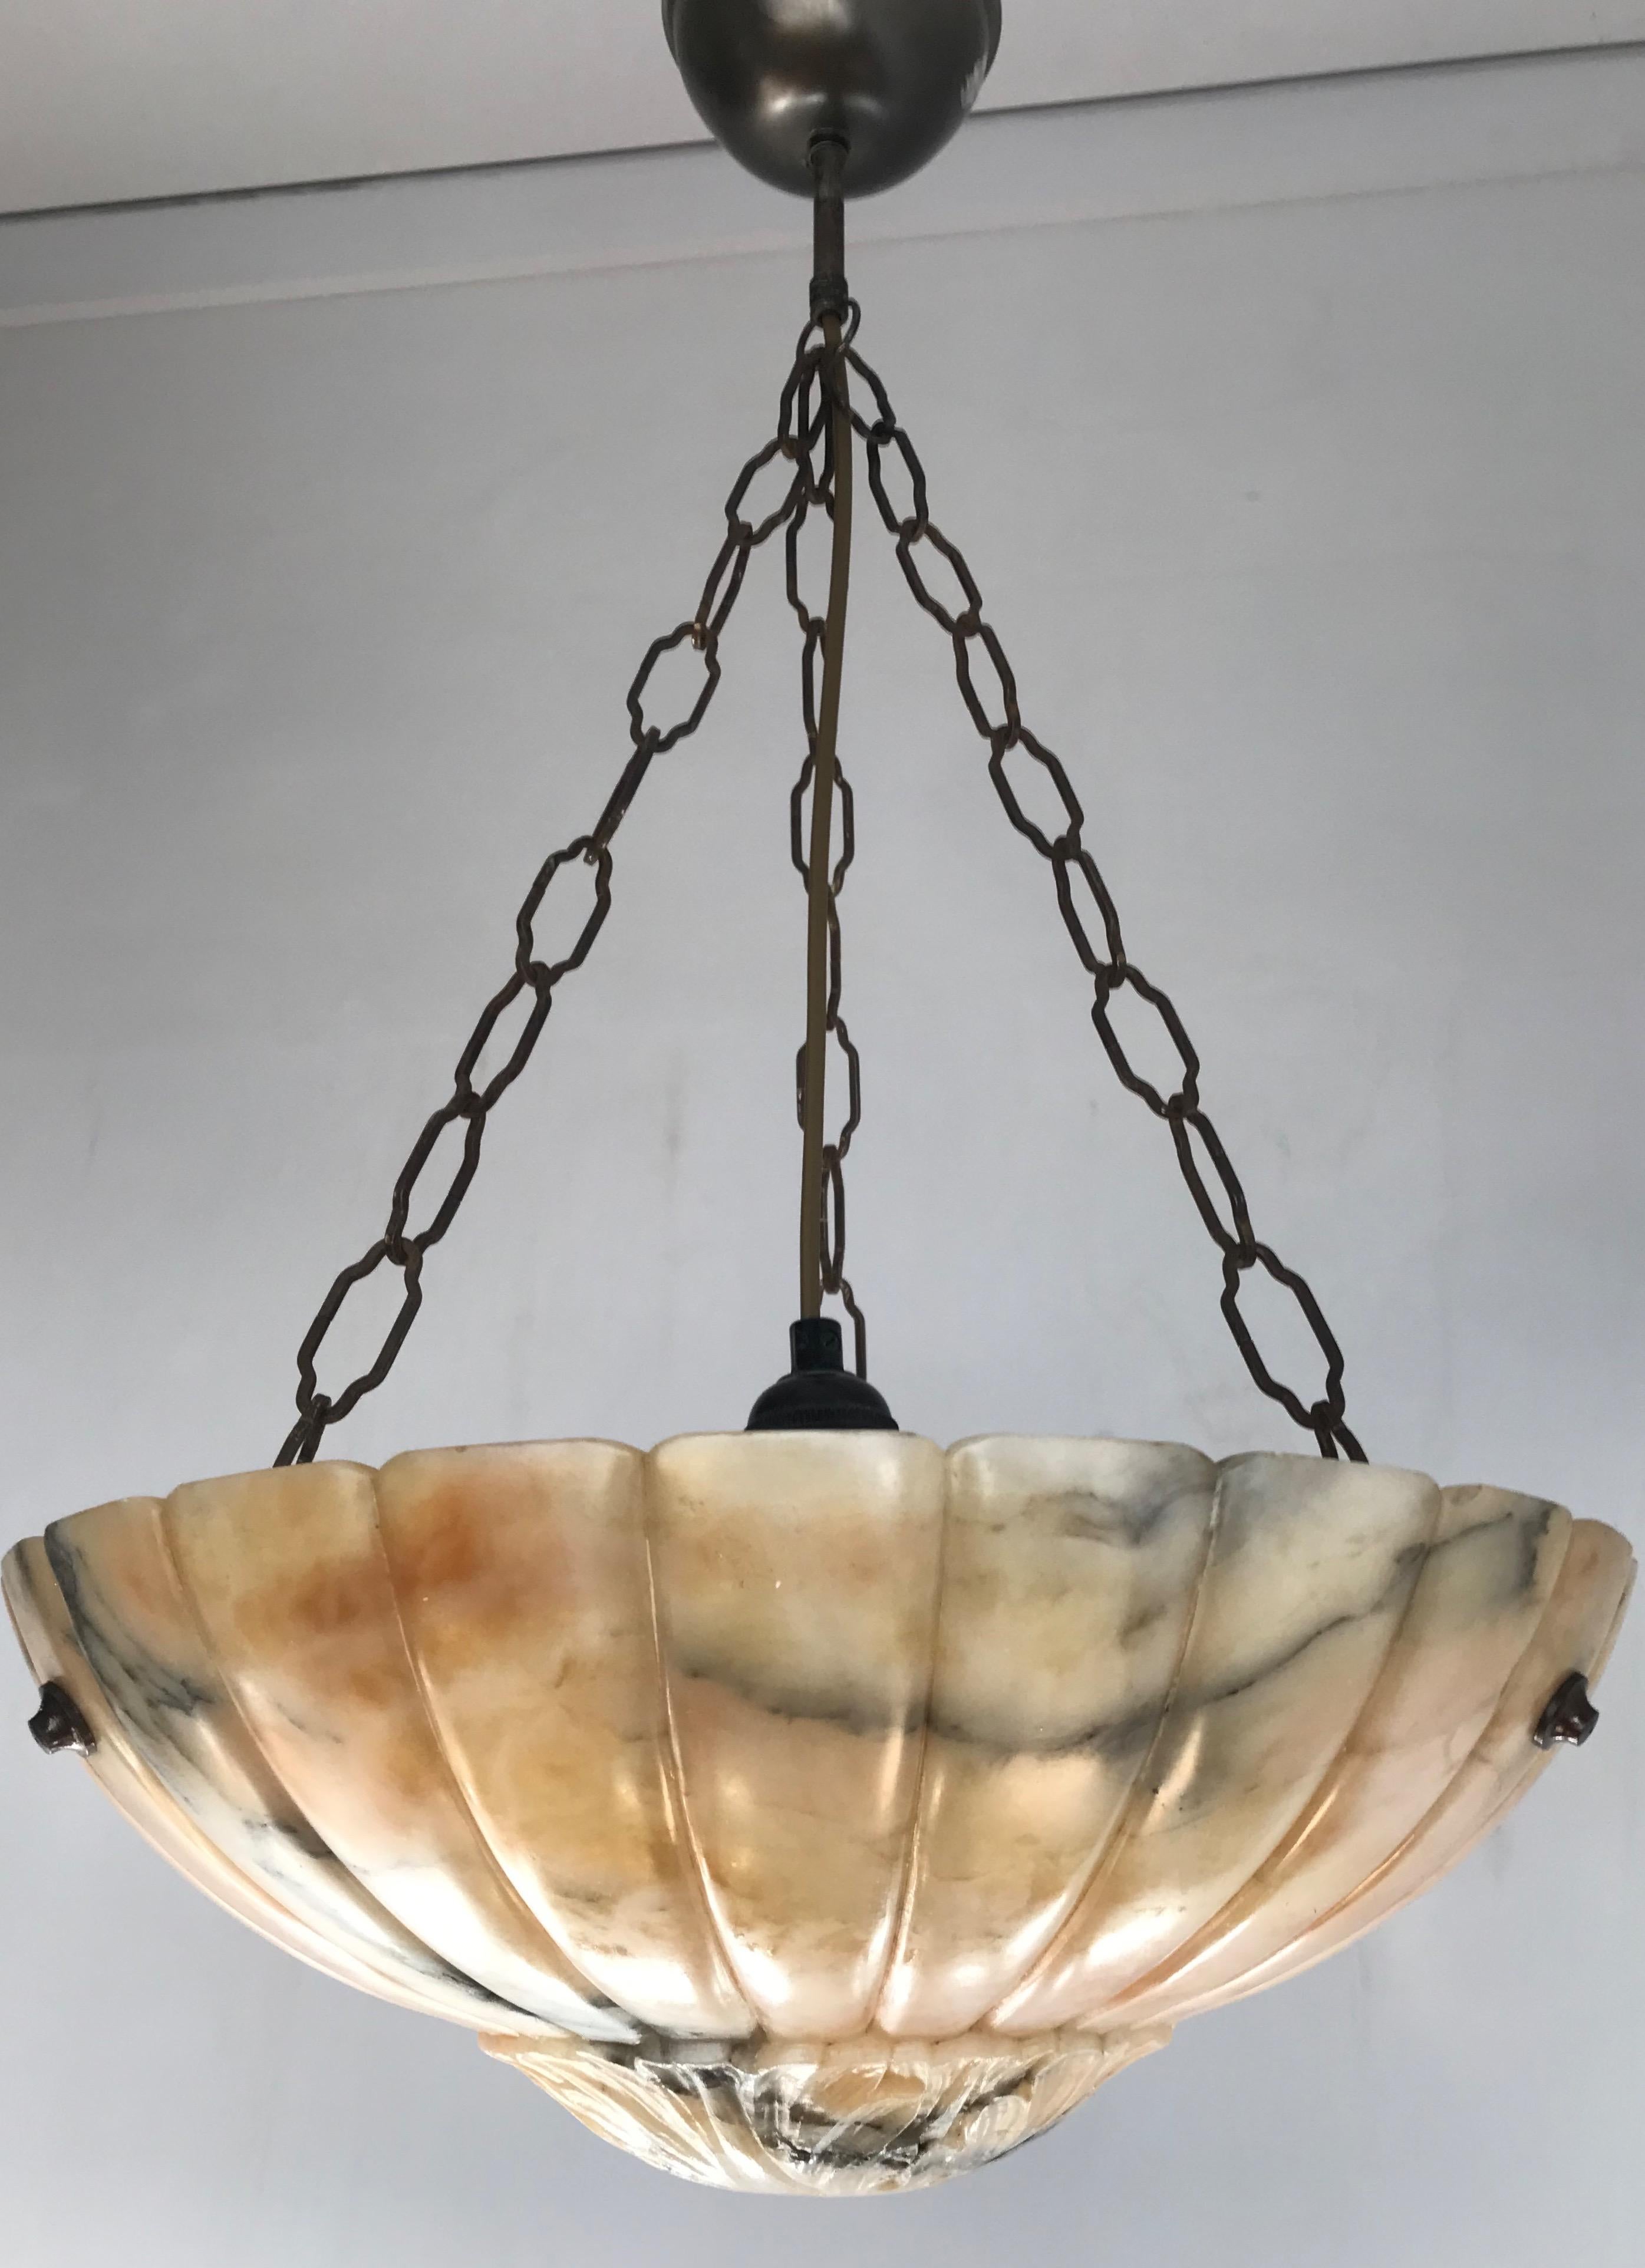 Beautiful colors with flowing black veins alabaster light fixture. 

If you are looking for a good quality and striking pendant to grace your interior then this early 20th century specimen could be perfect for you. It is all handcrafted, practical